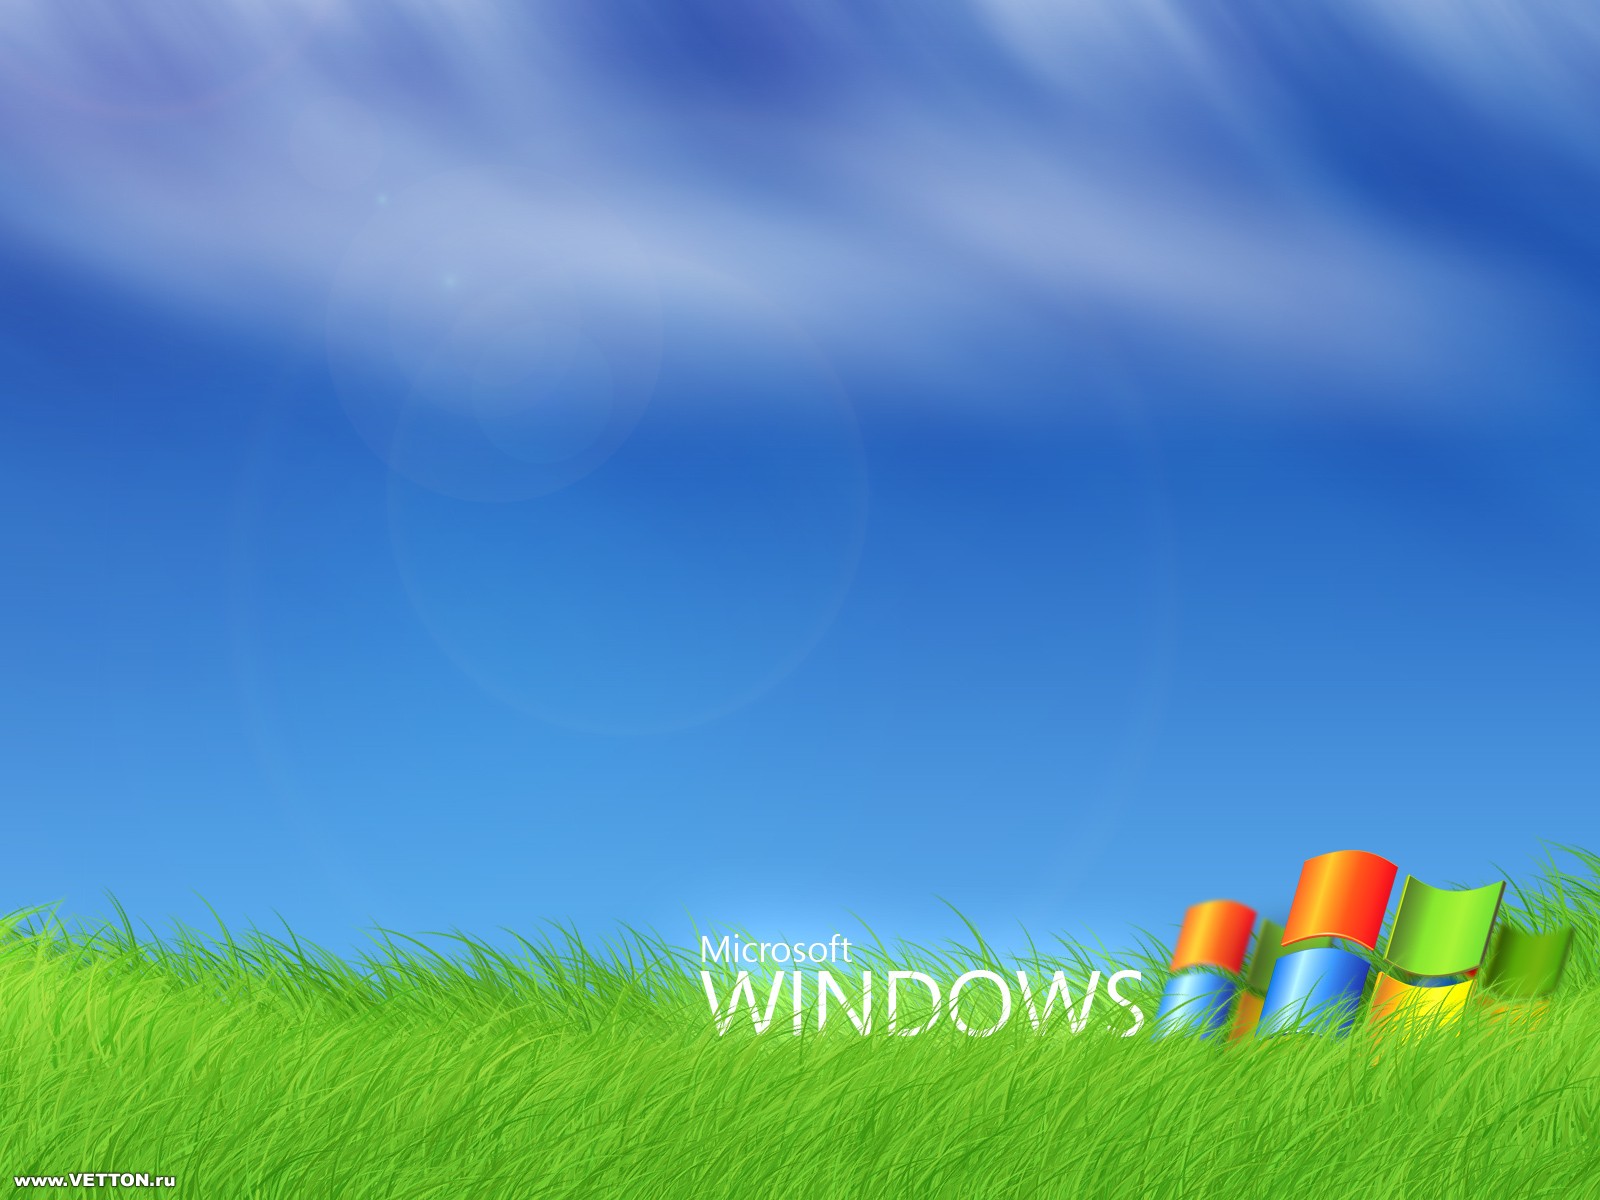 Download 45 HD Windows XP Wallpapers for 1600x1200